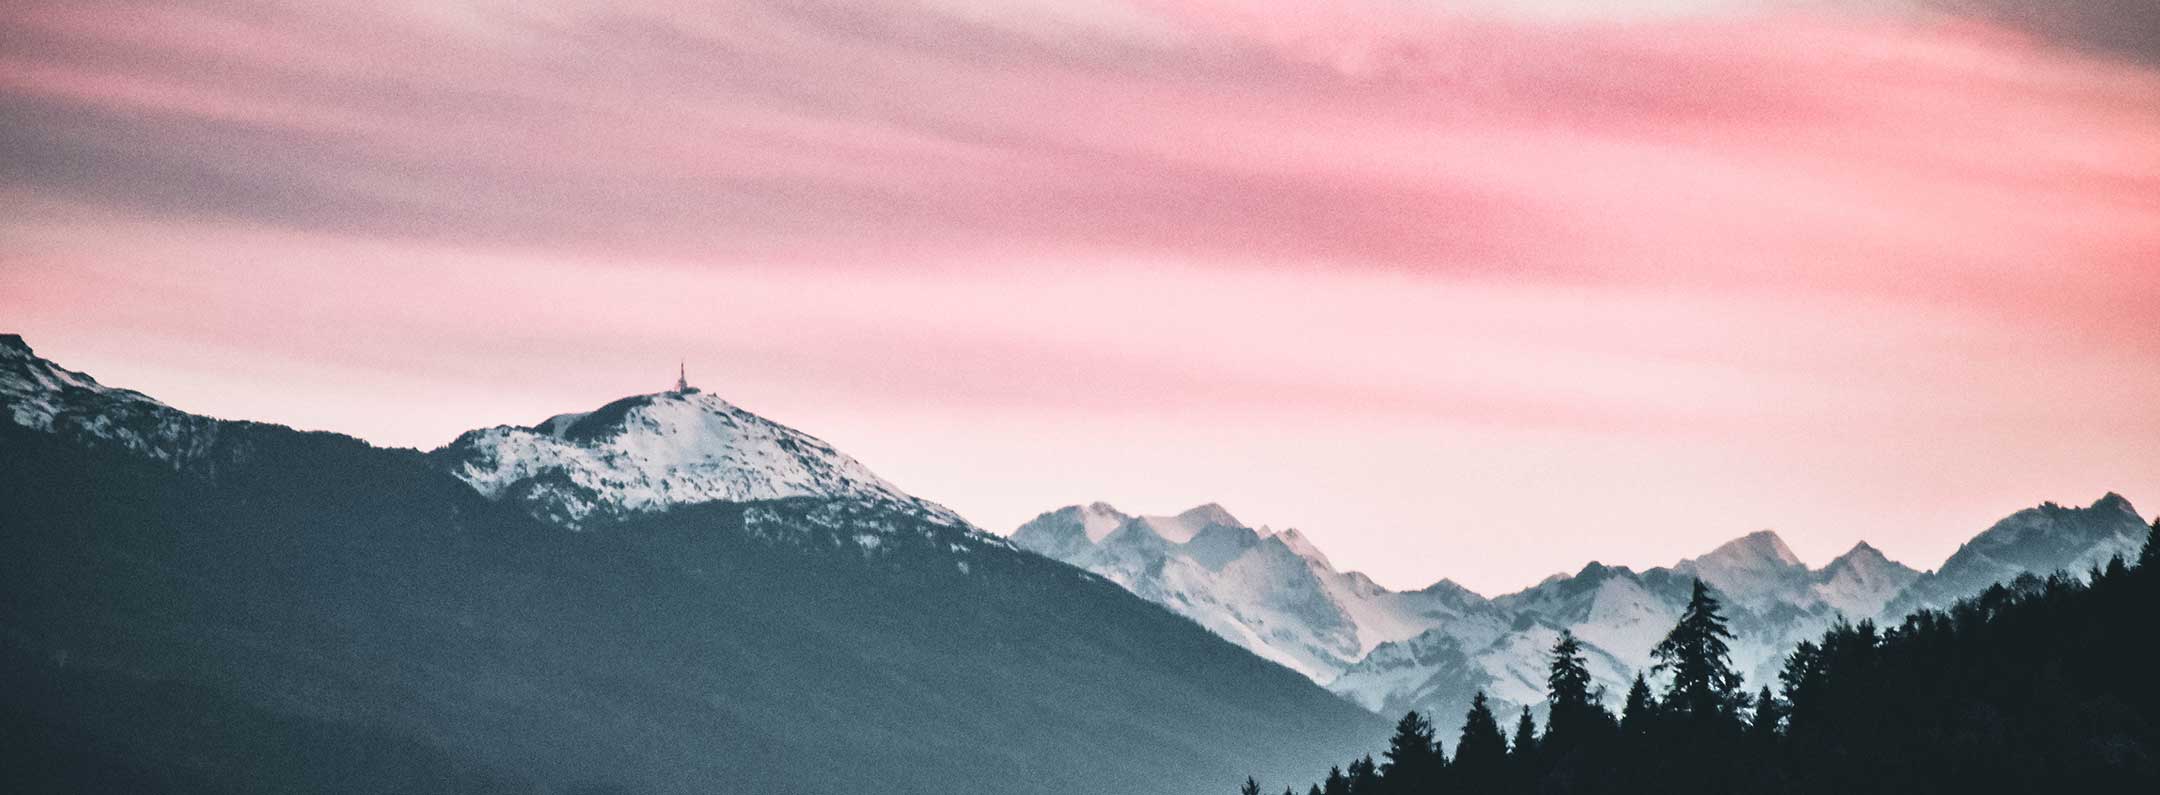 A pink and purple sunset over a mountain range - Mountain